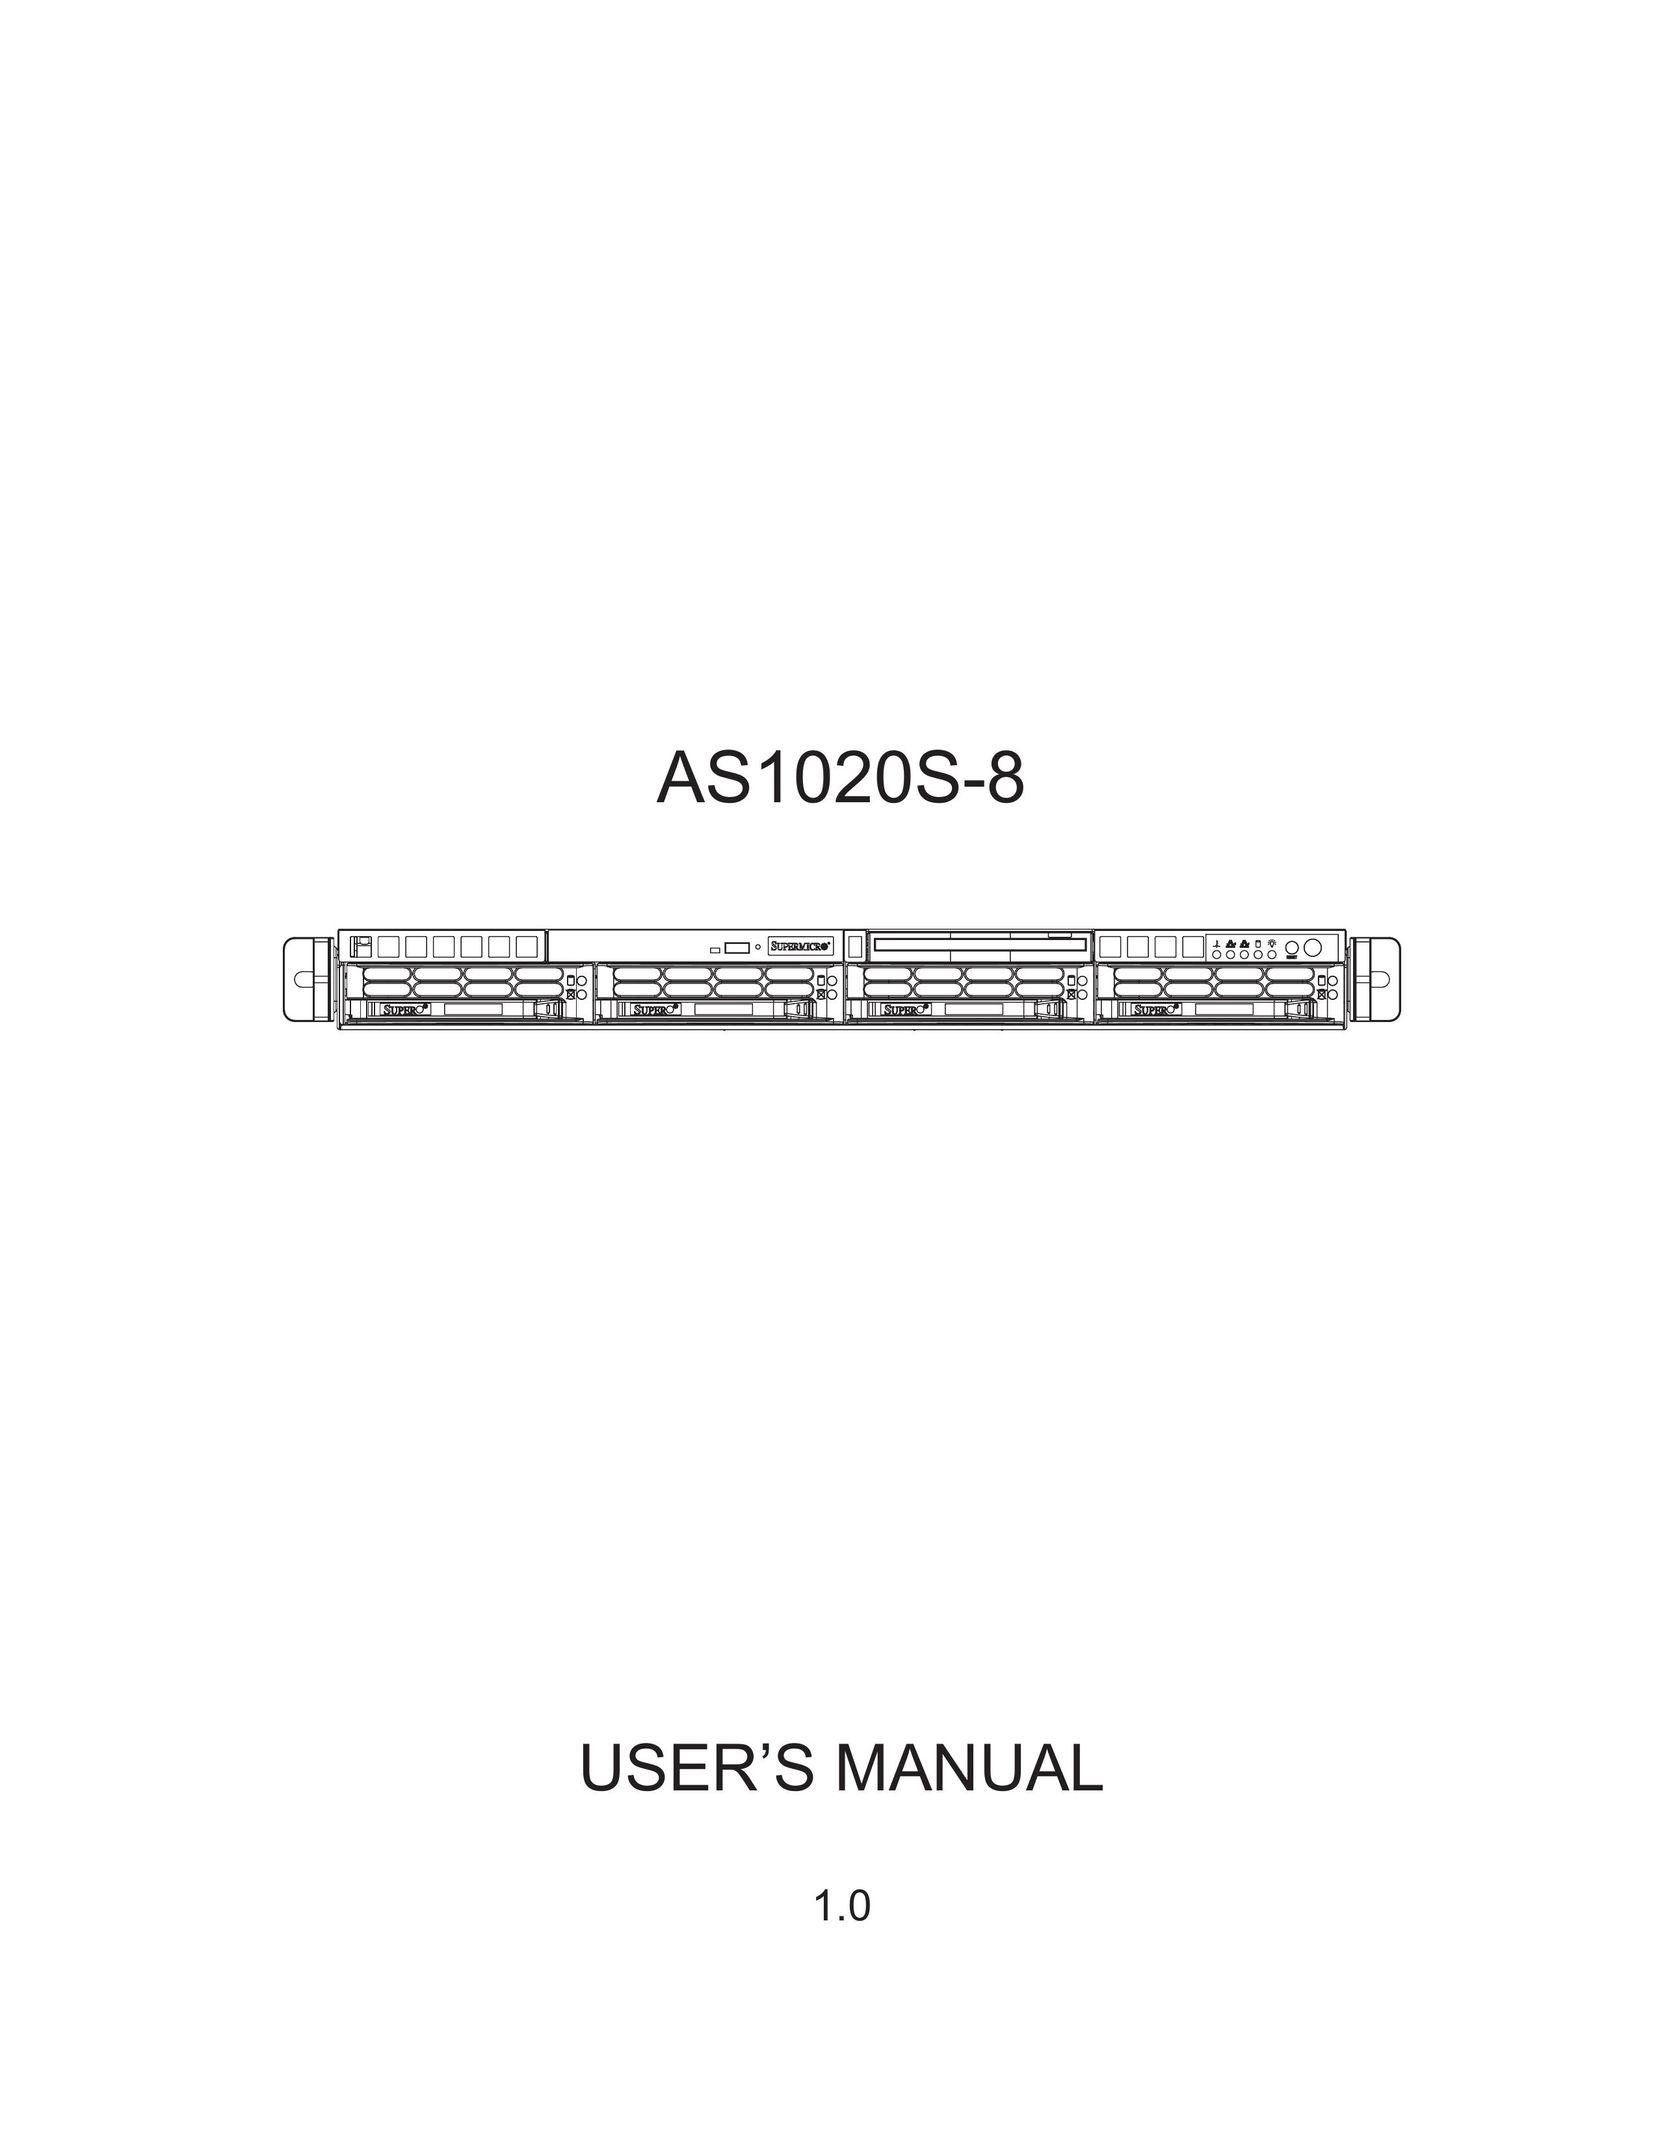 SUPER MICRO Computer AS1020S-8 Network Card User Manual